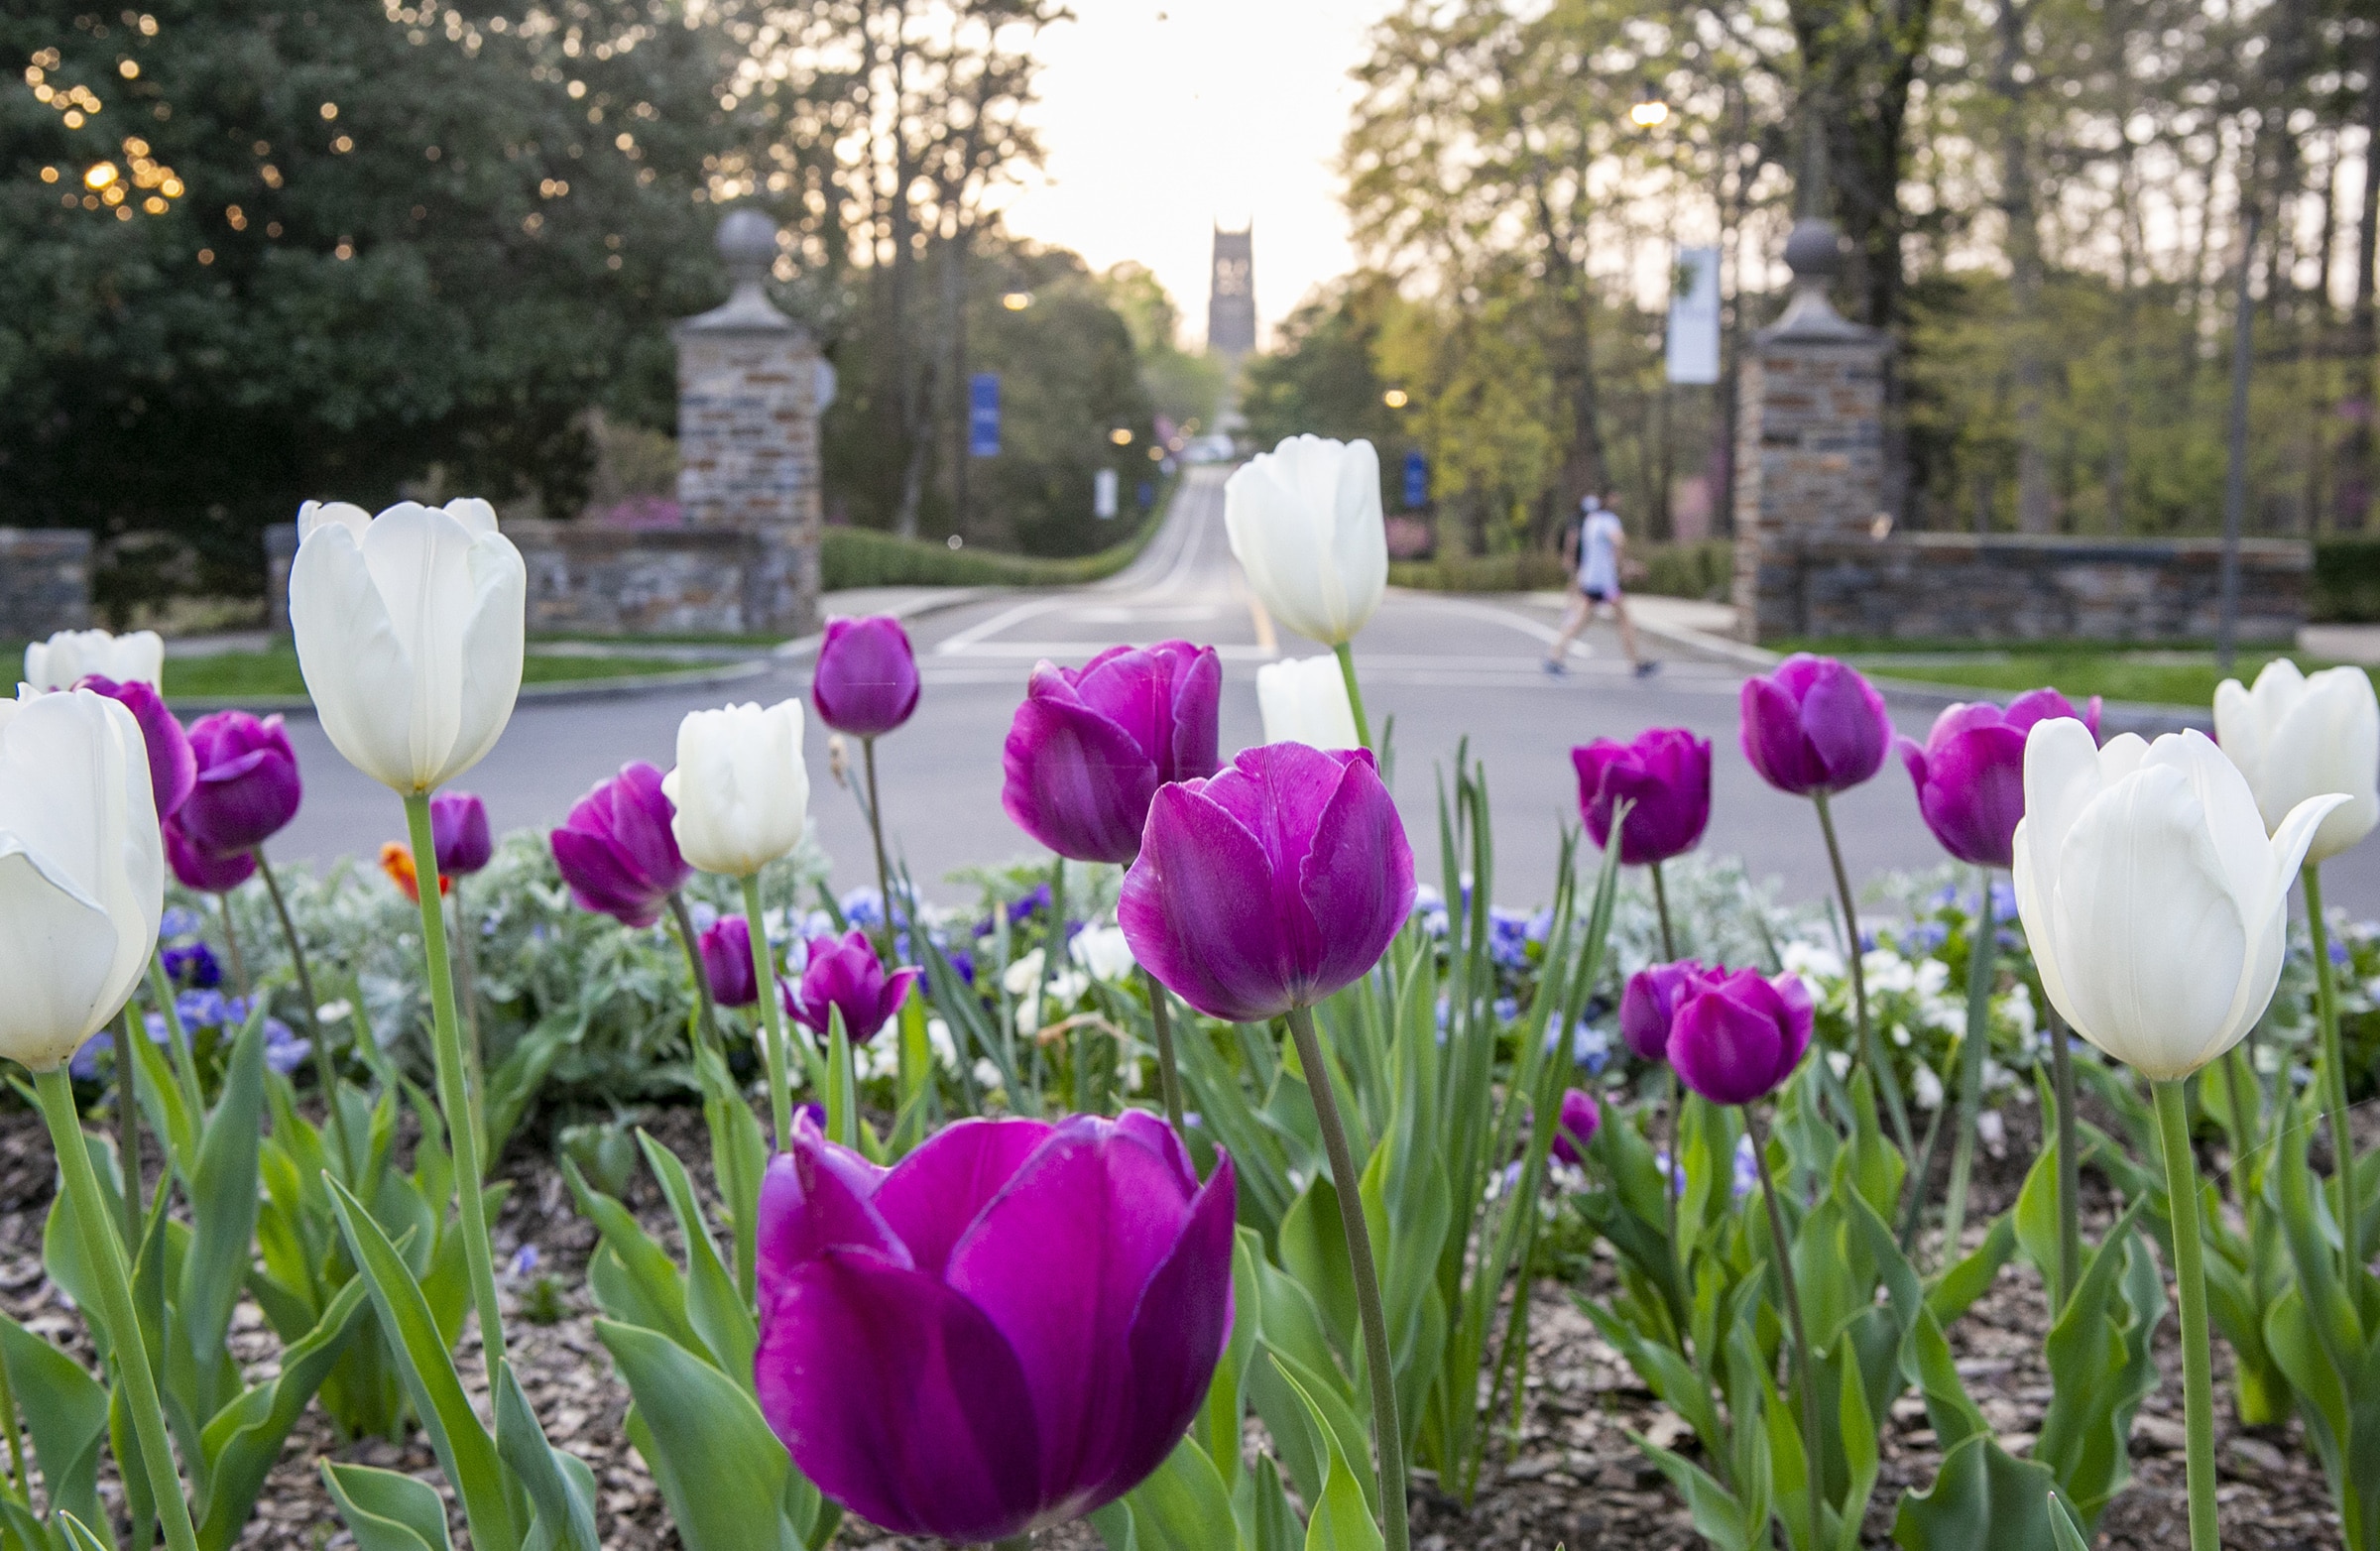 Tulips beautify the traffic circle in front of Duke Chapel during a sunny Spring evening.